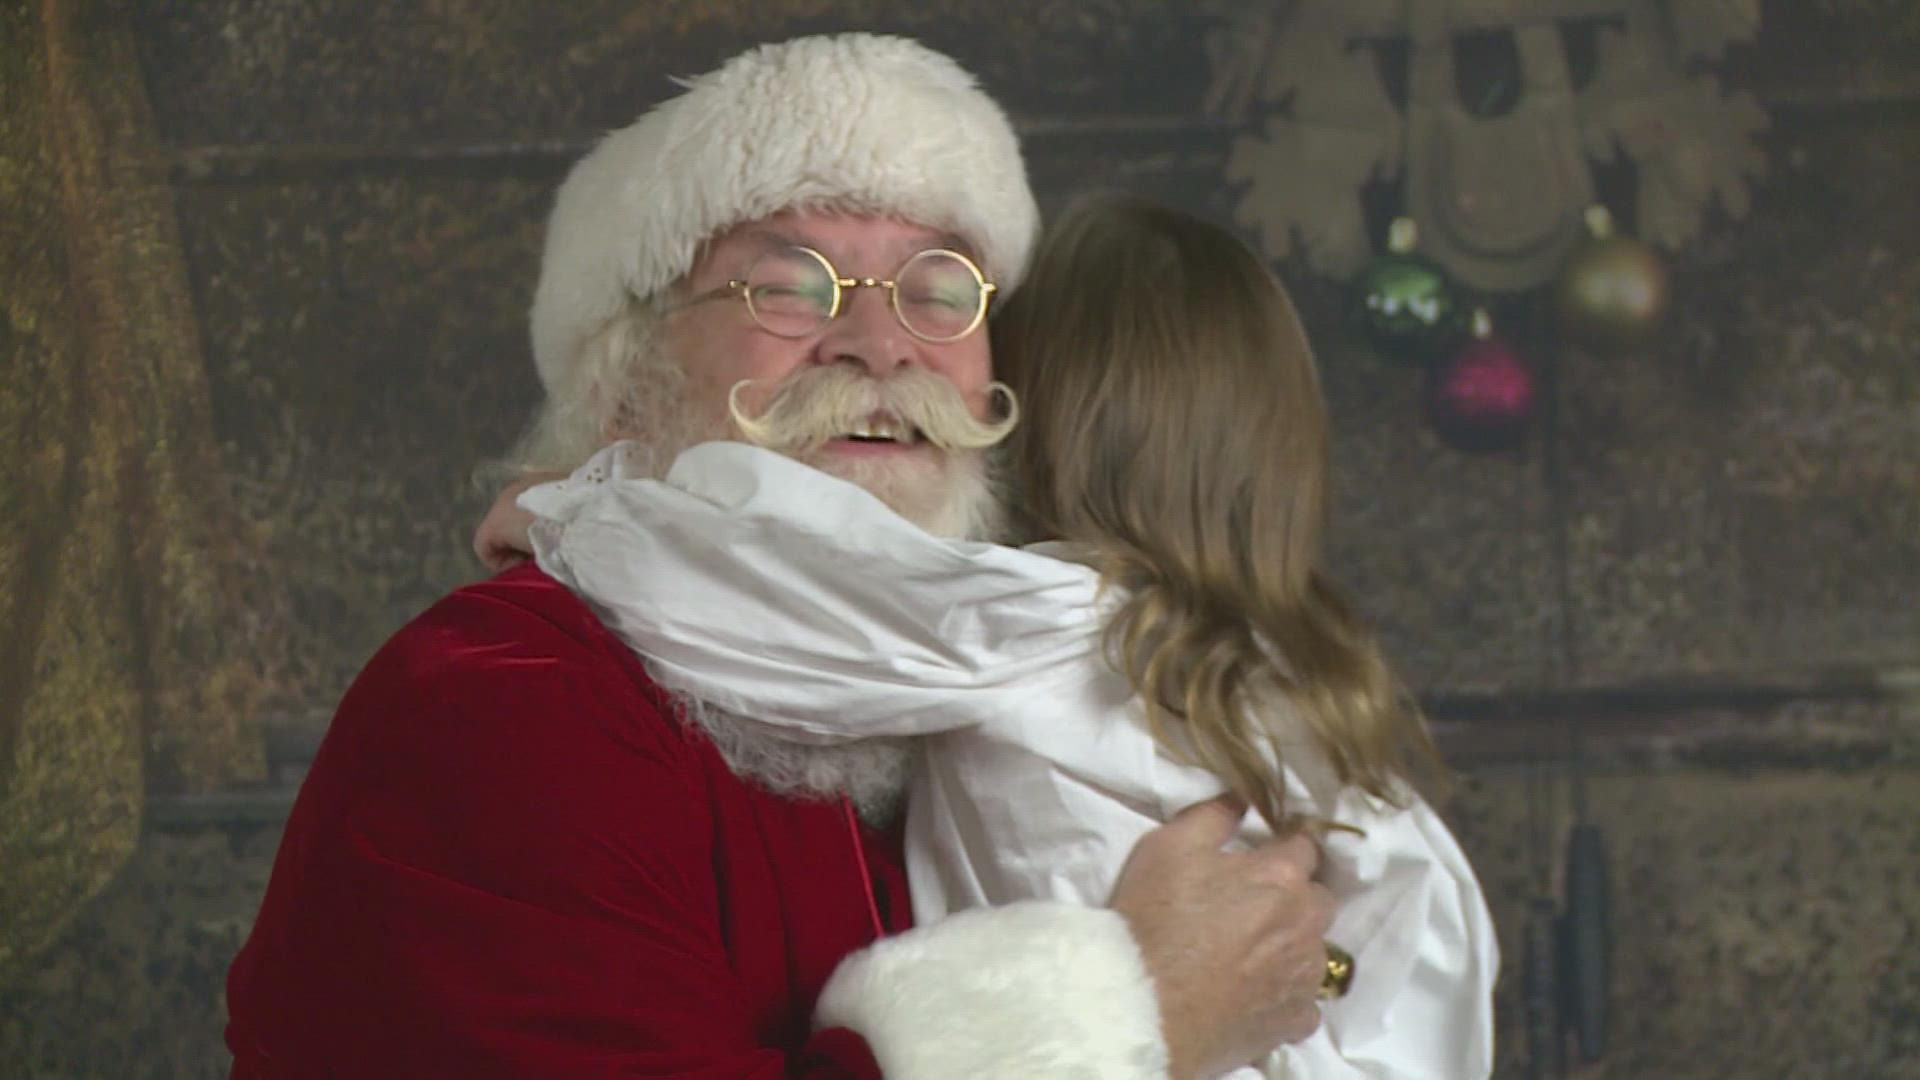 He's known as Santa 'Cliff'. For decades, he's dressed as Santa, bringing joy to families across the Piedmont Triad.